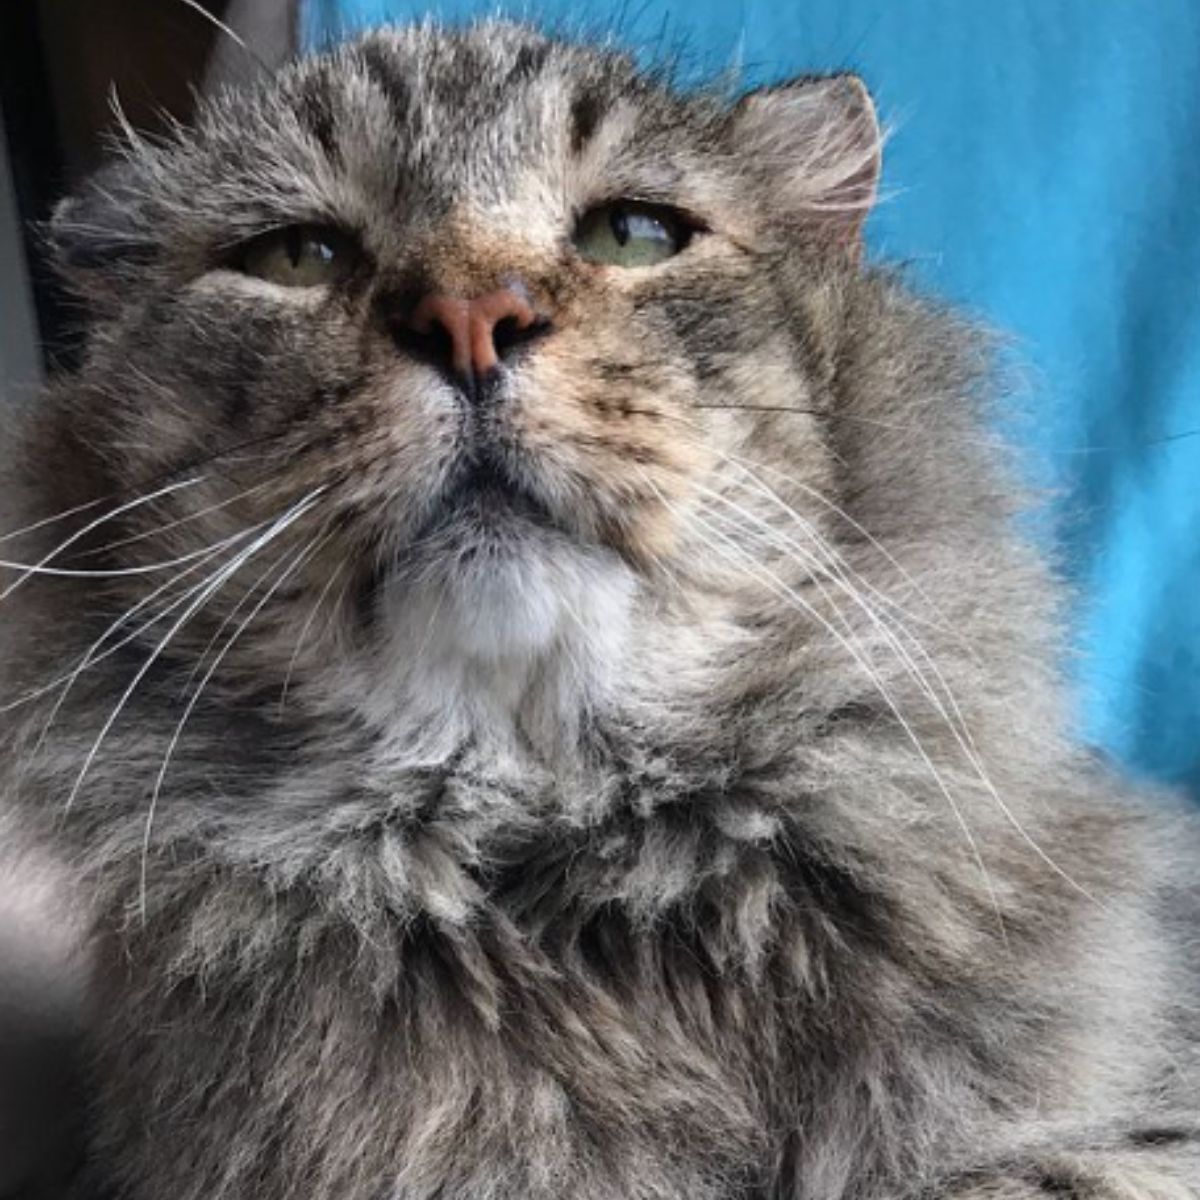 close-up photo of the old cat